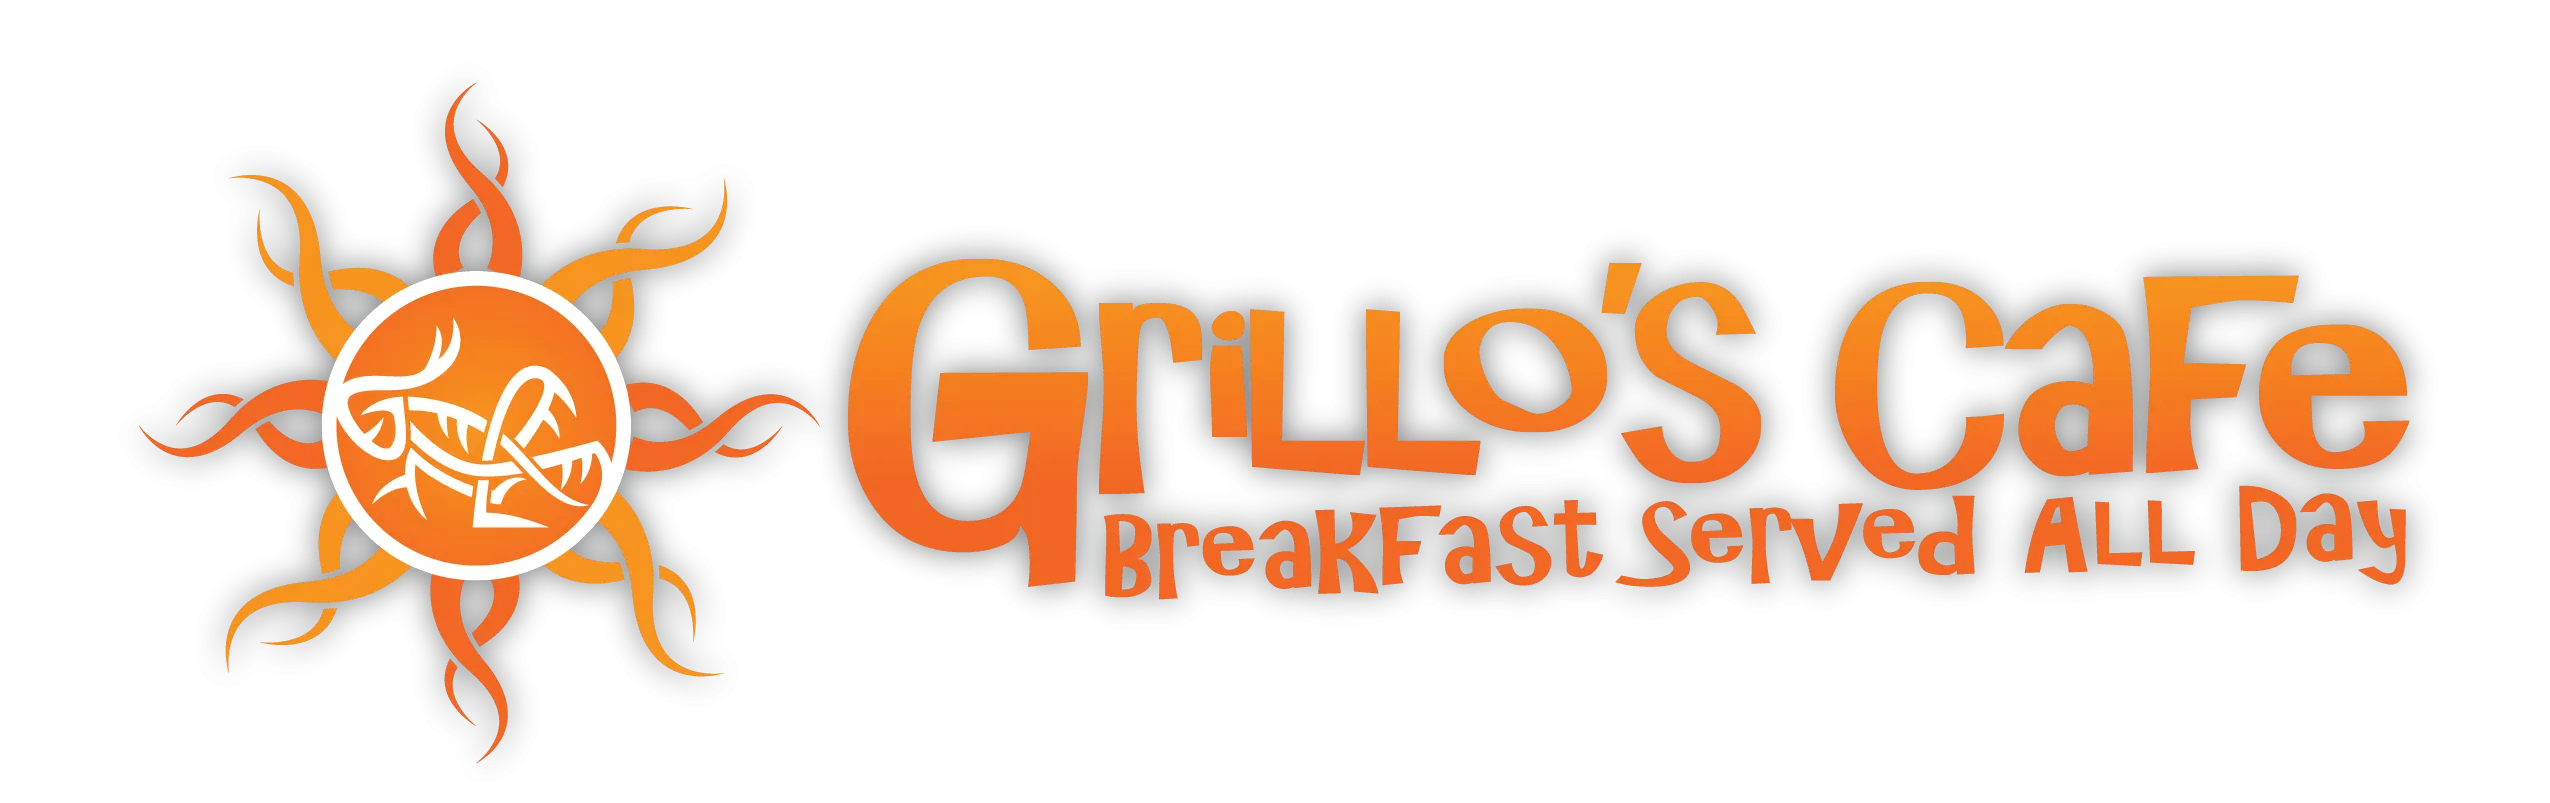 Grillo's Cafe, Marshfield MO, Breakfast Served All Day.